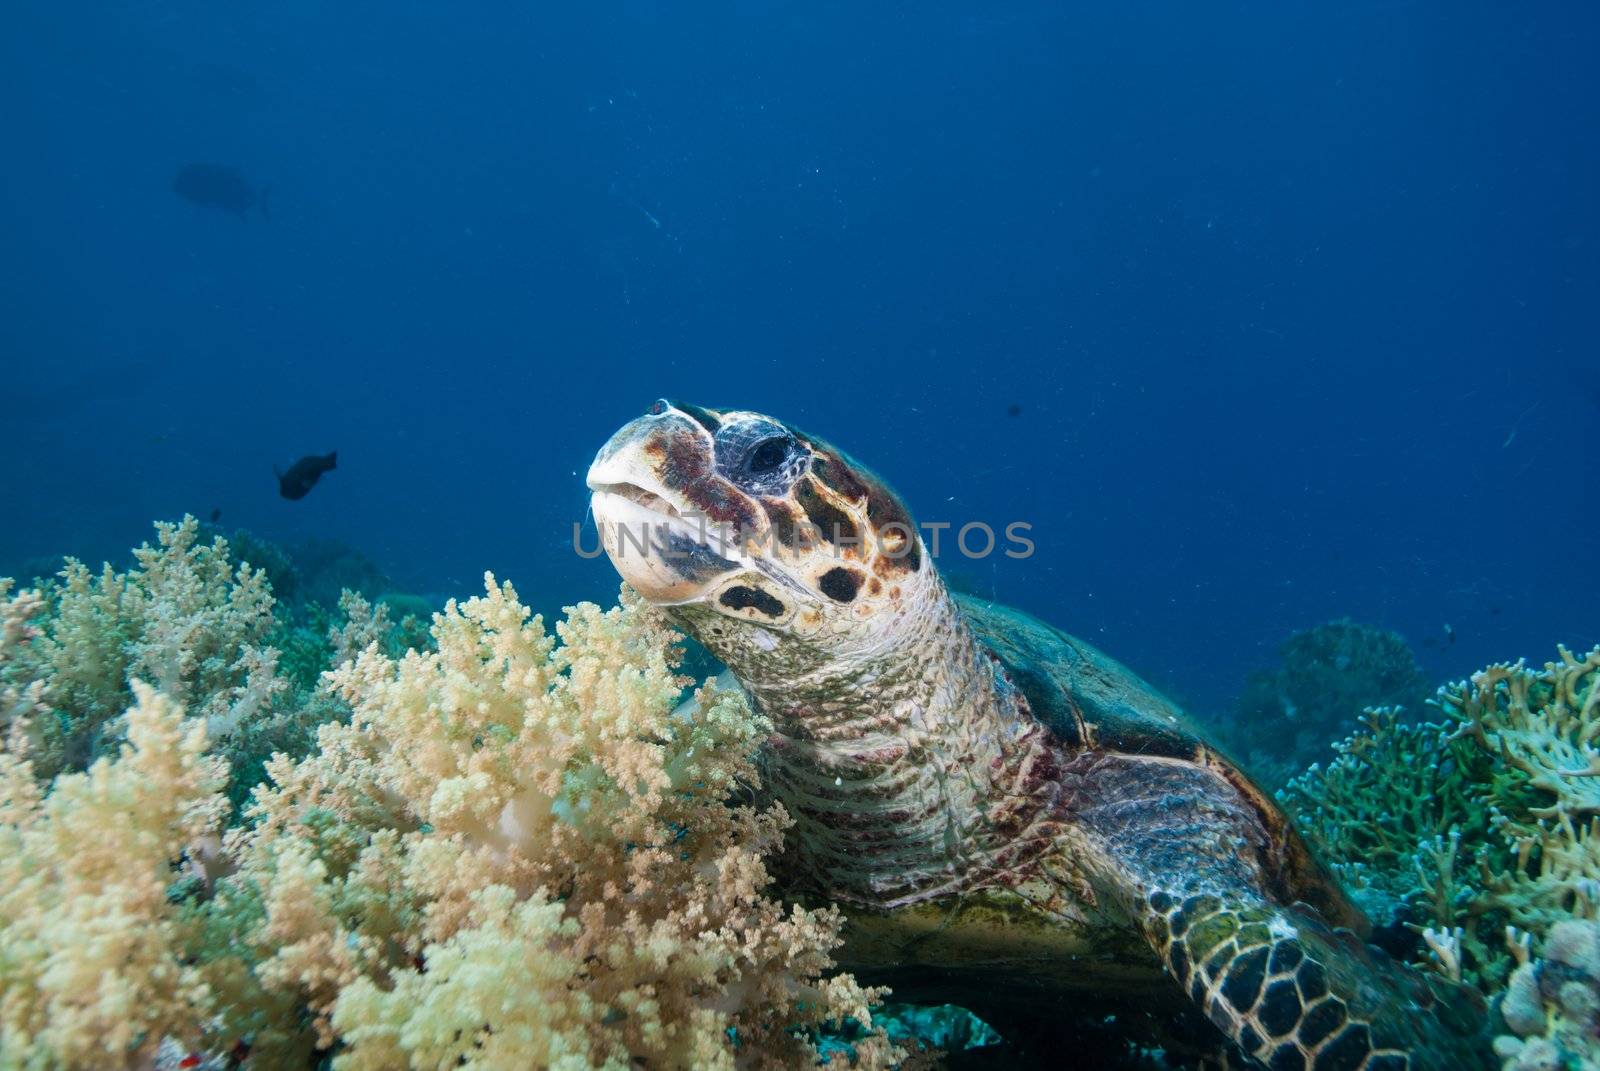 Hawksbill turtle by markdoherty